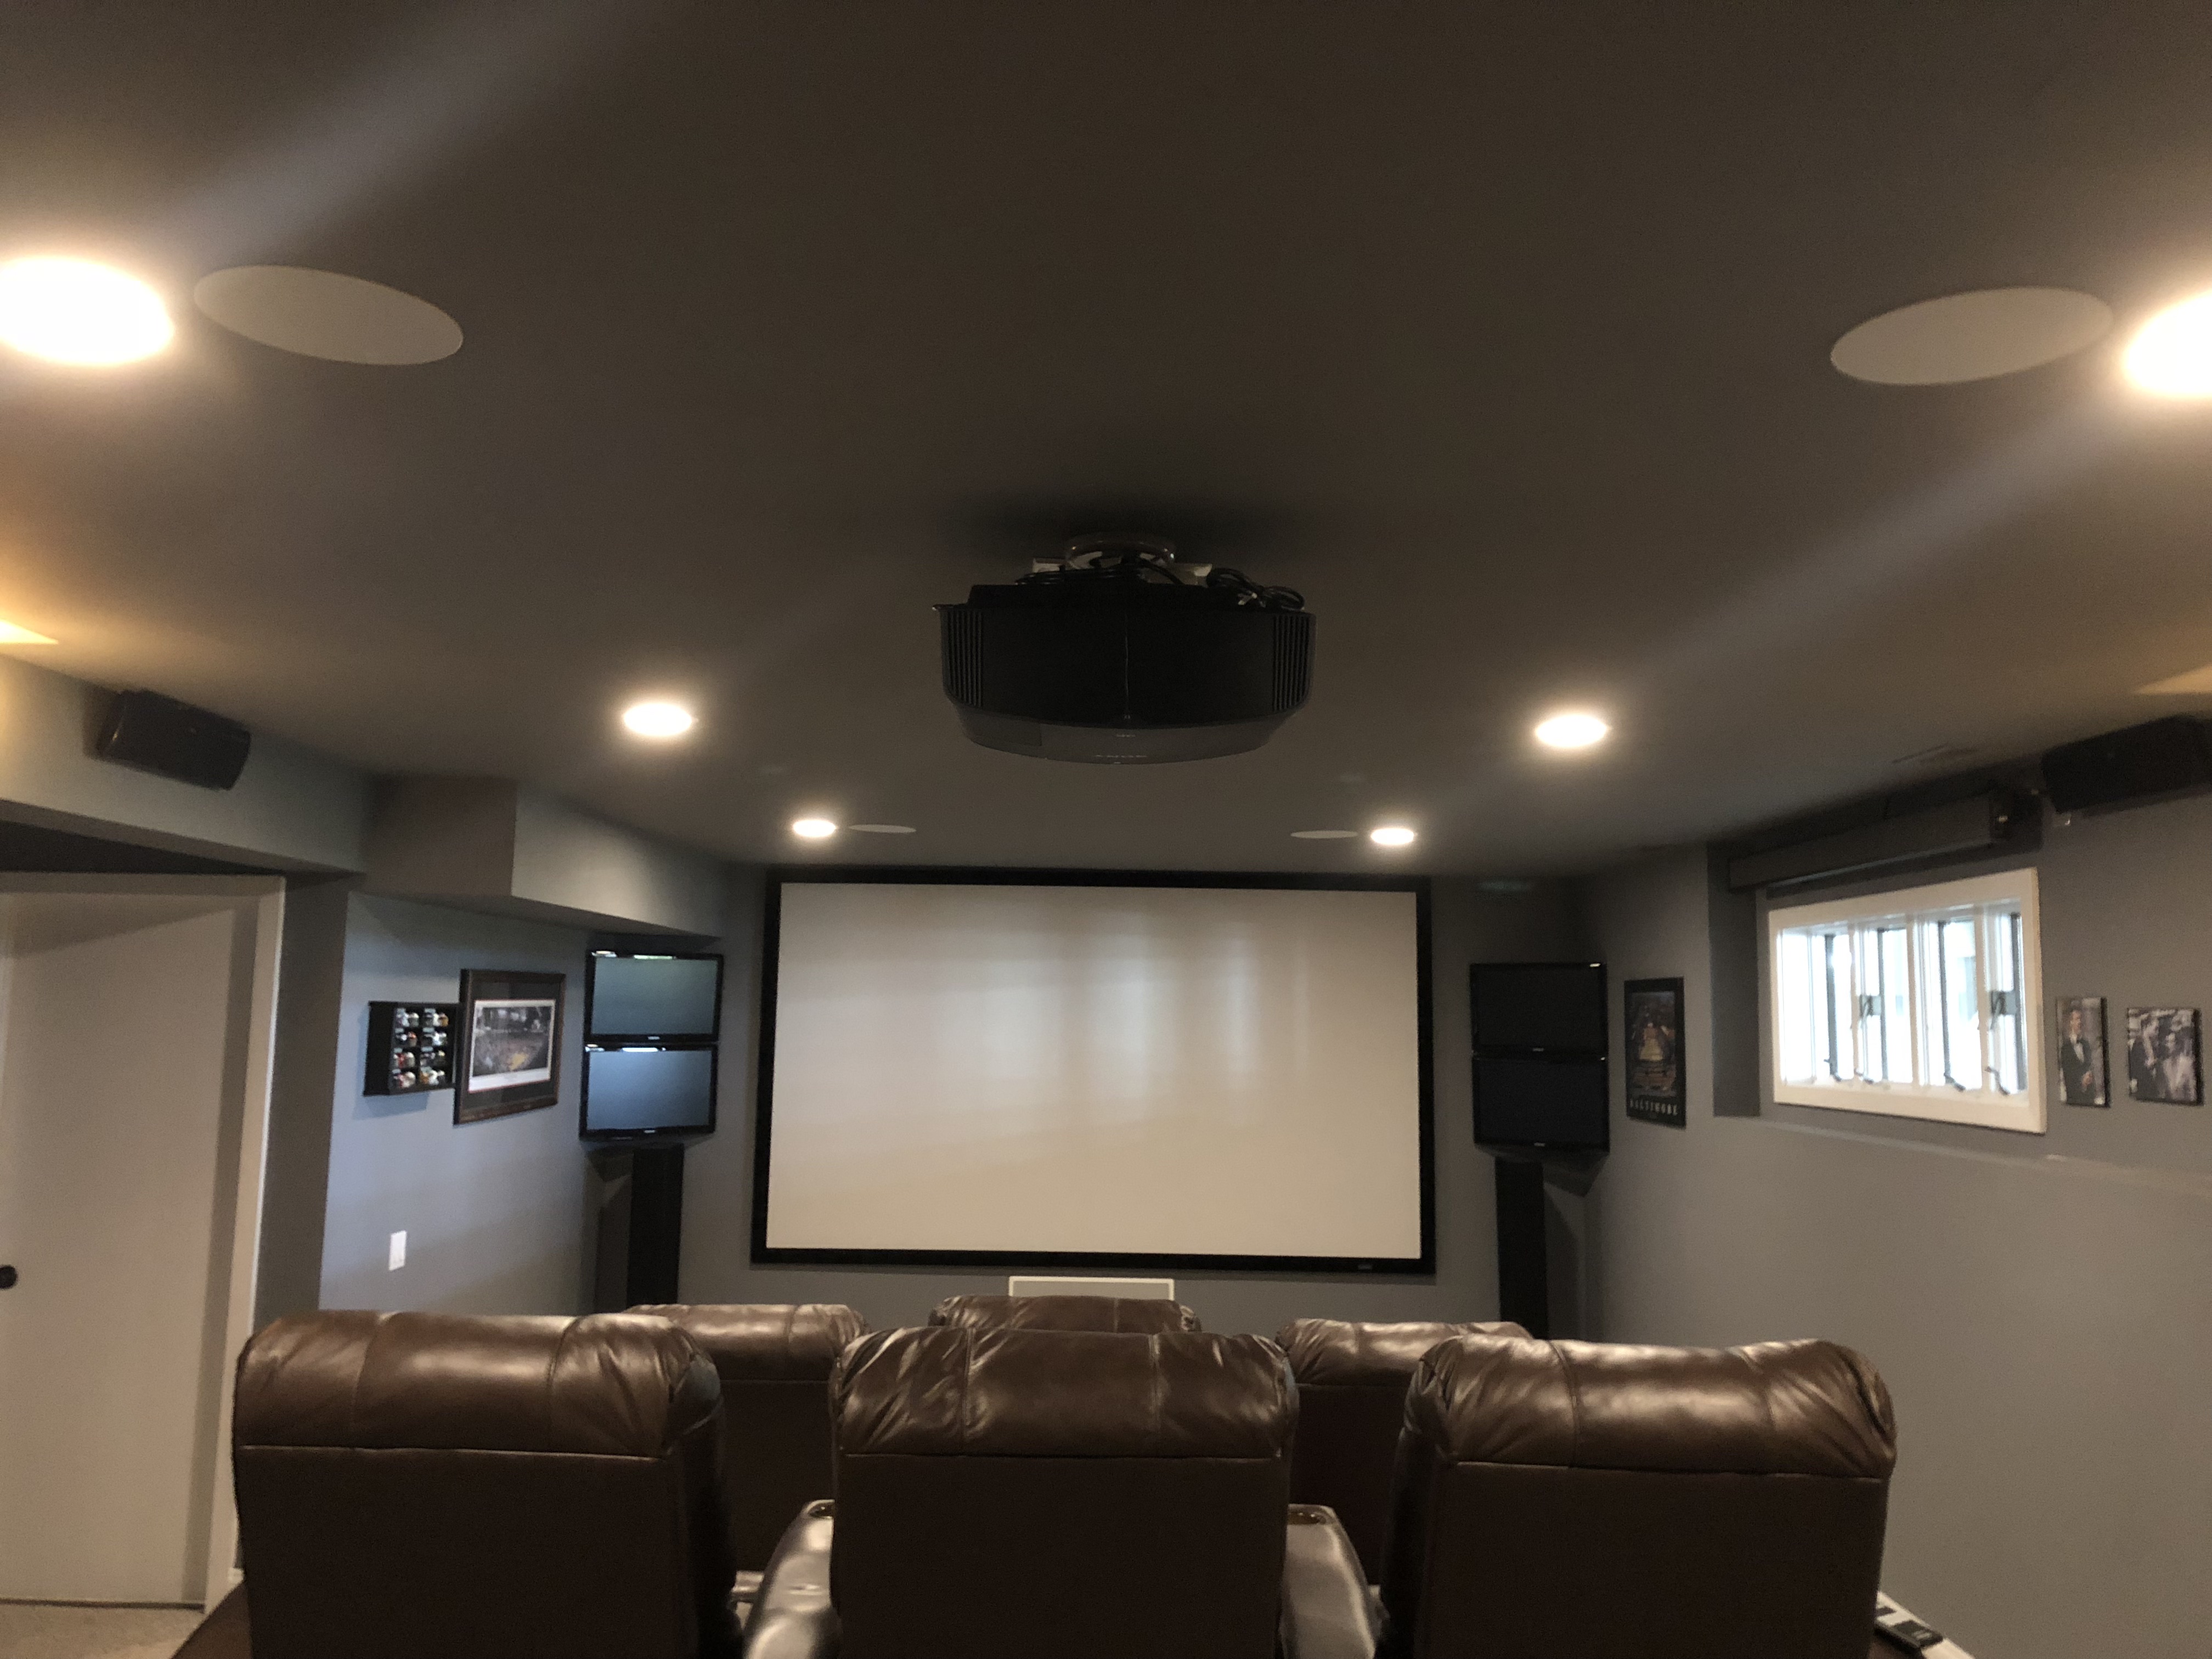 dolby home theatre system